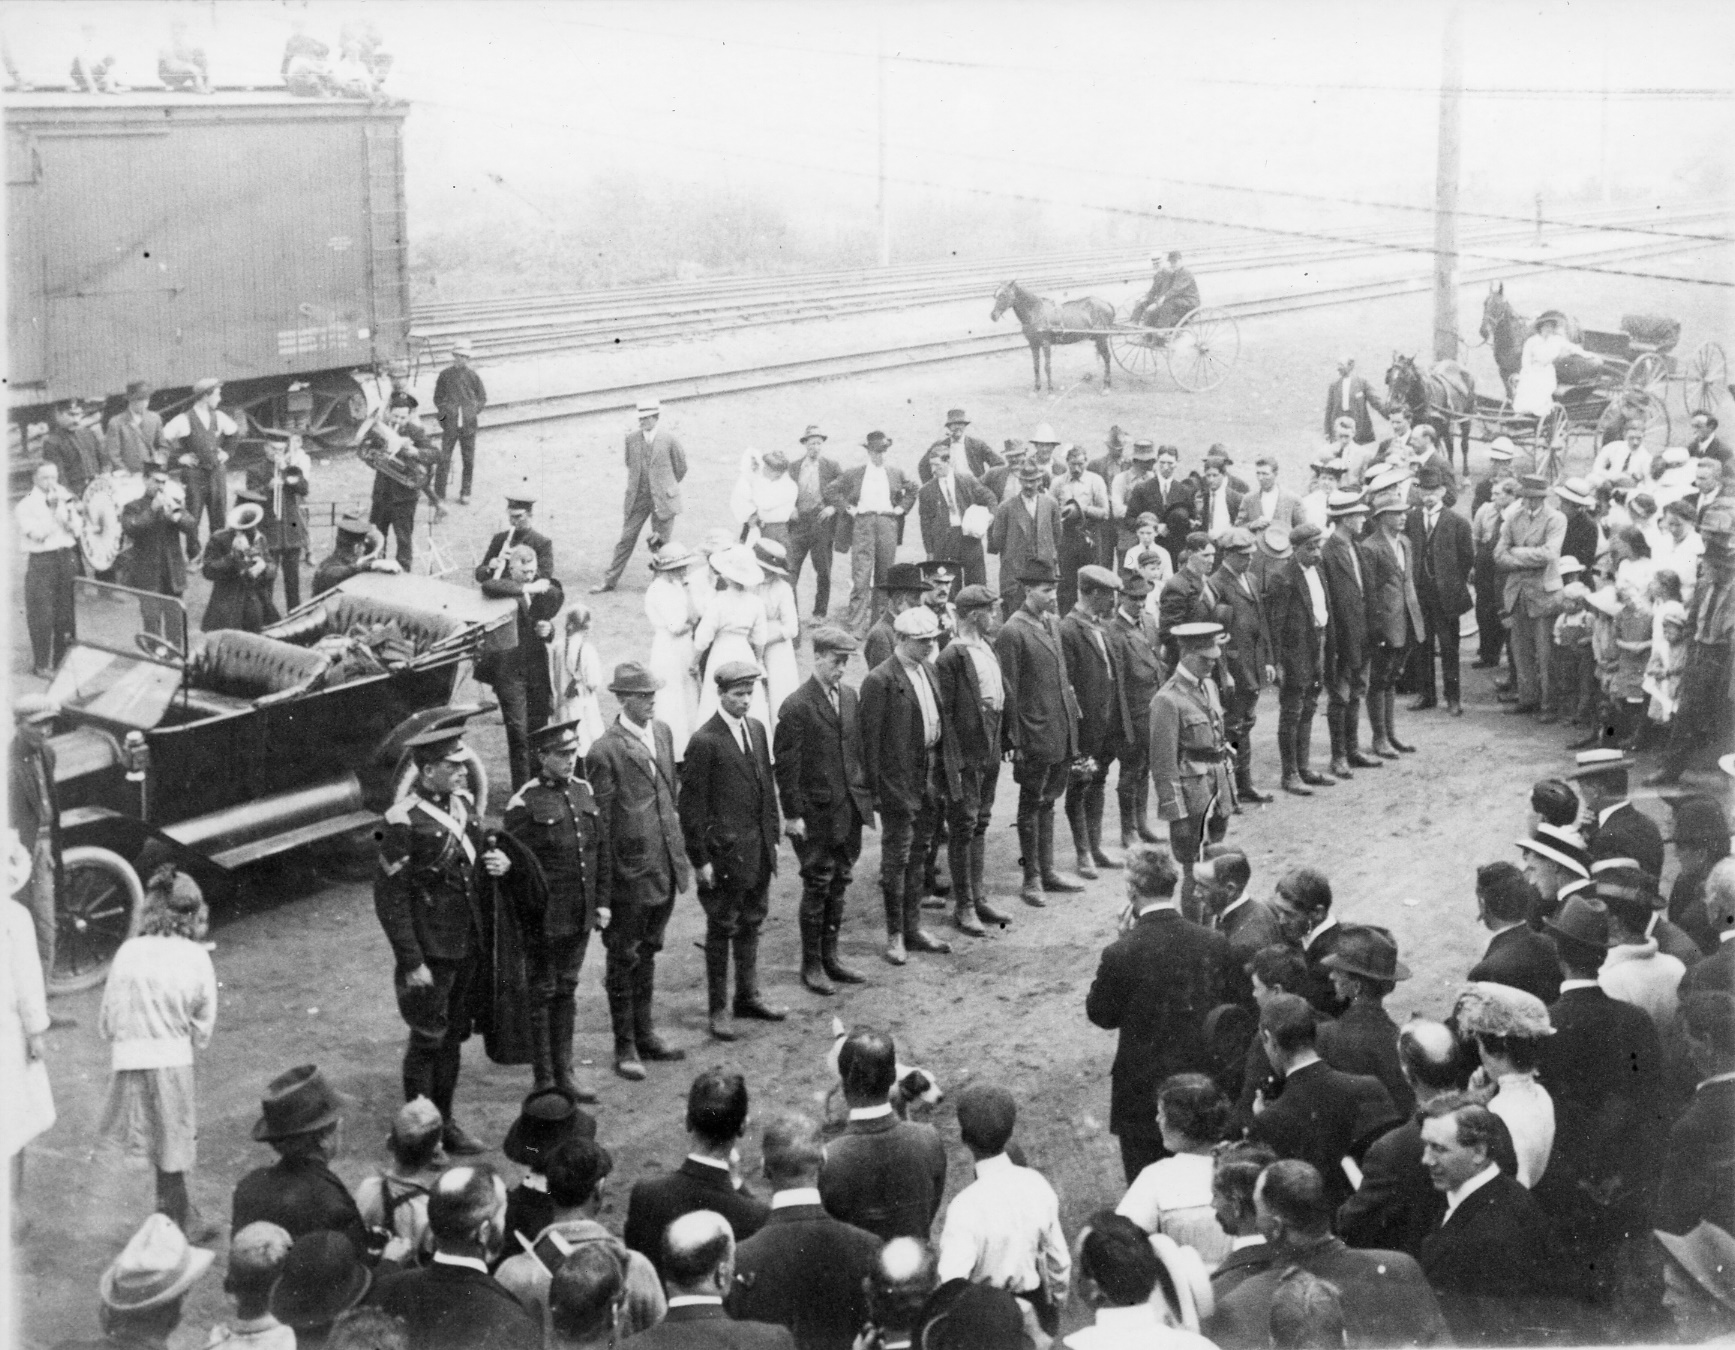 A line of men and soldiers pose facing a crowd in front of train tracks